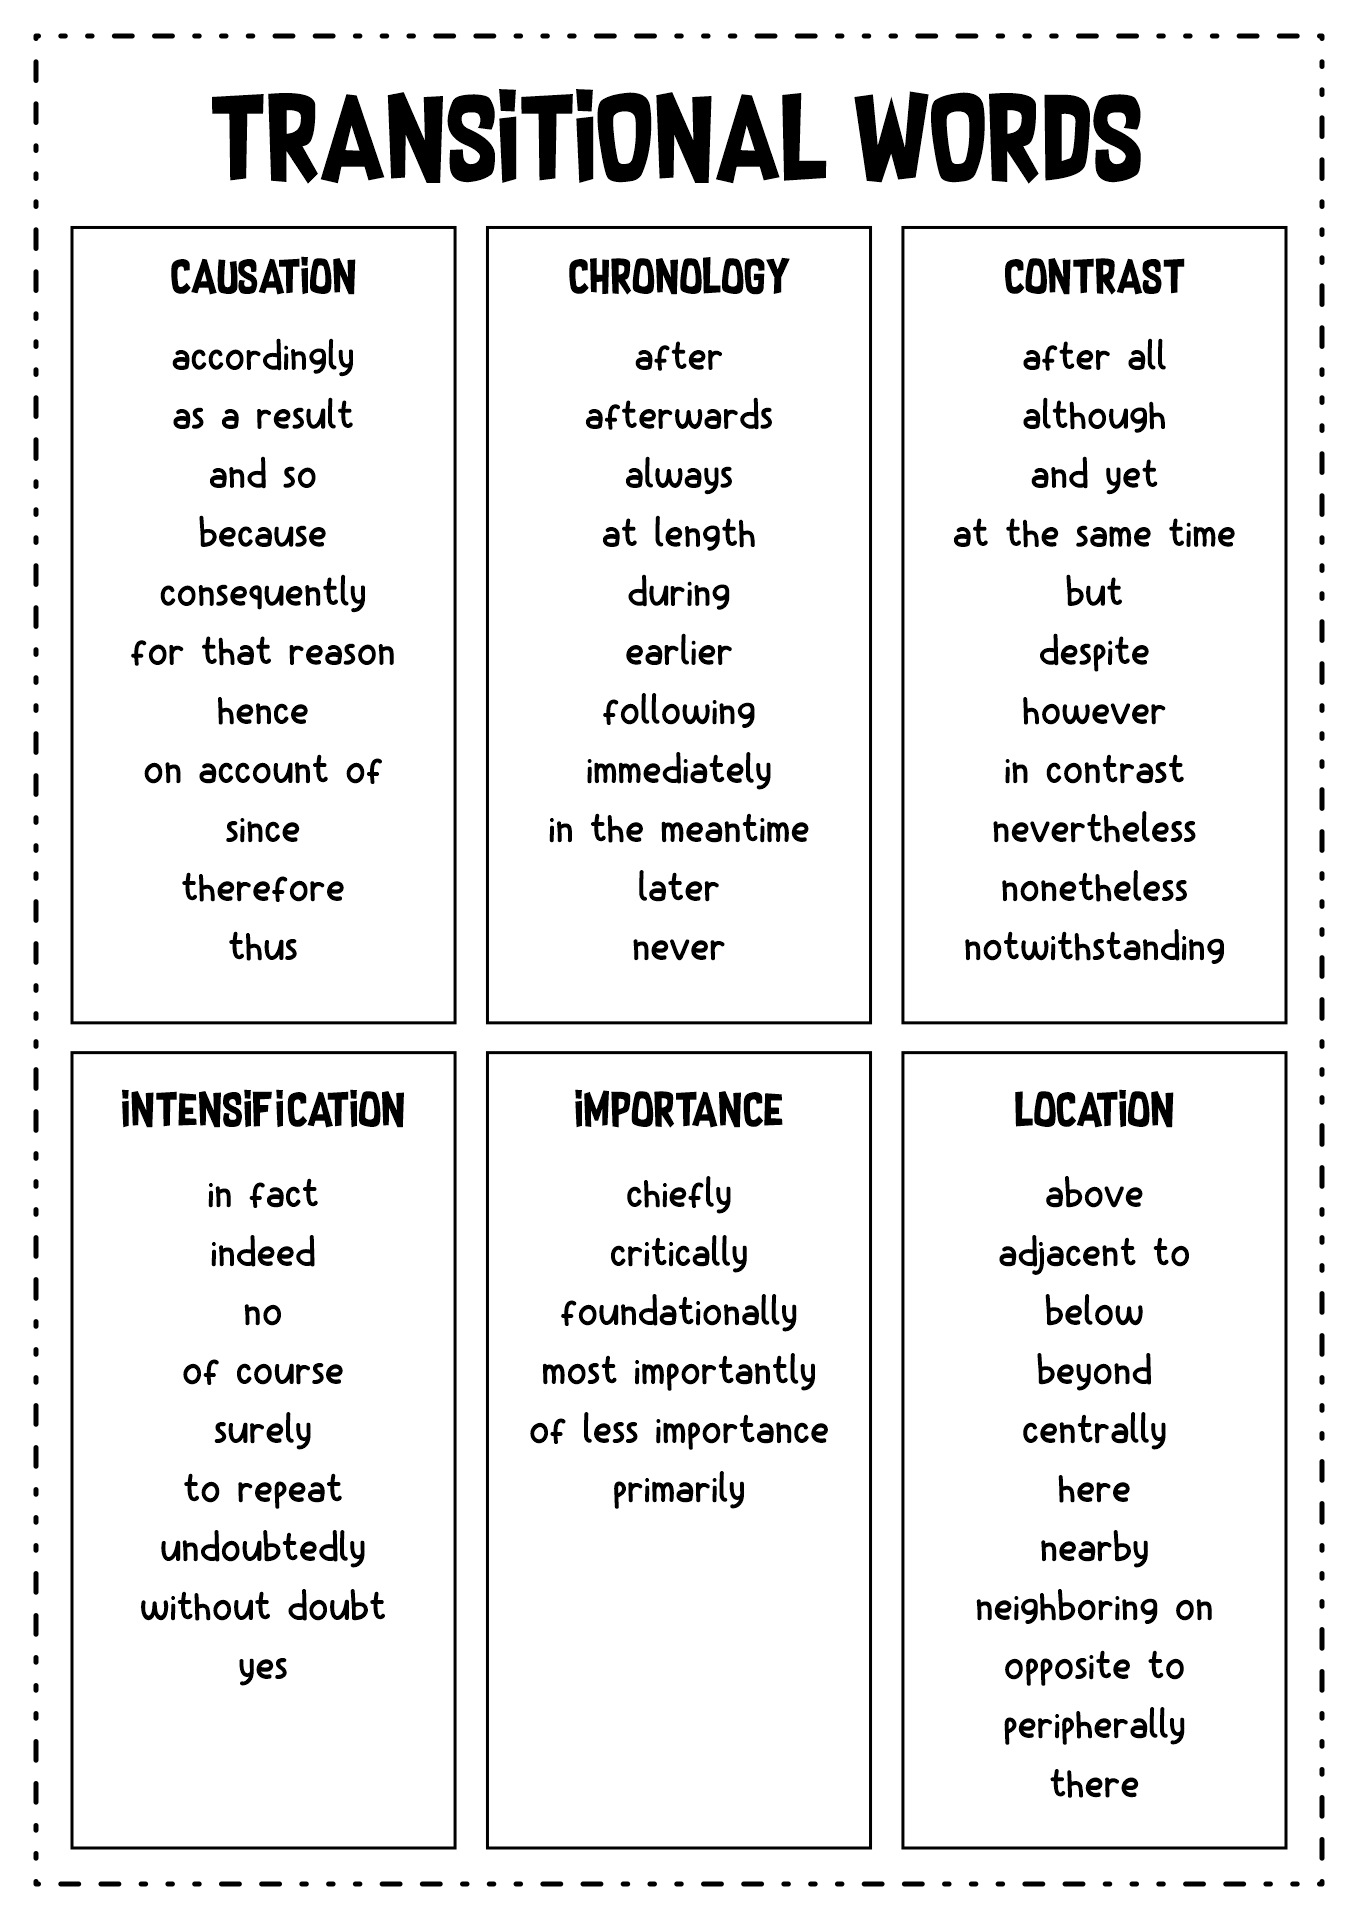 Transitional words in writing activities